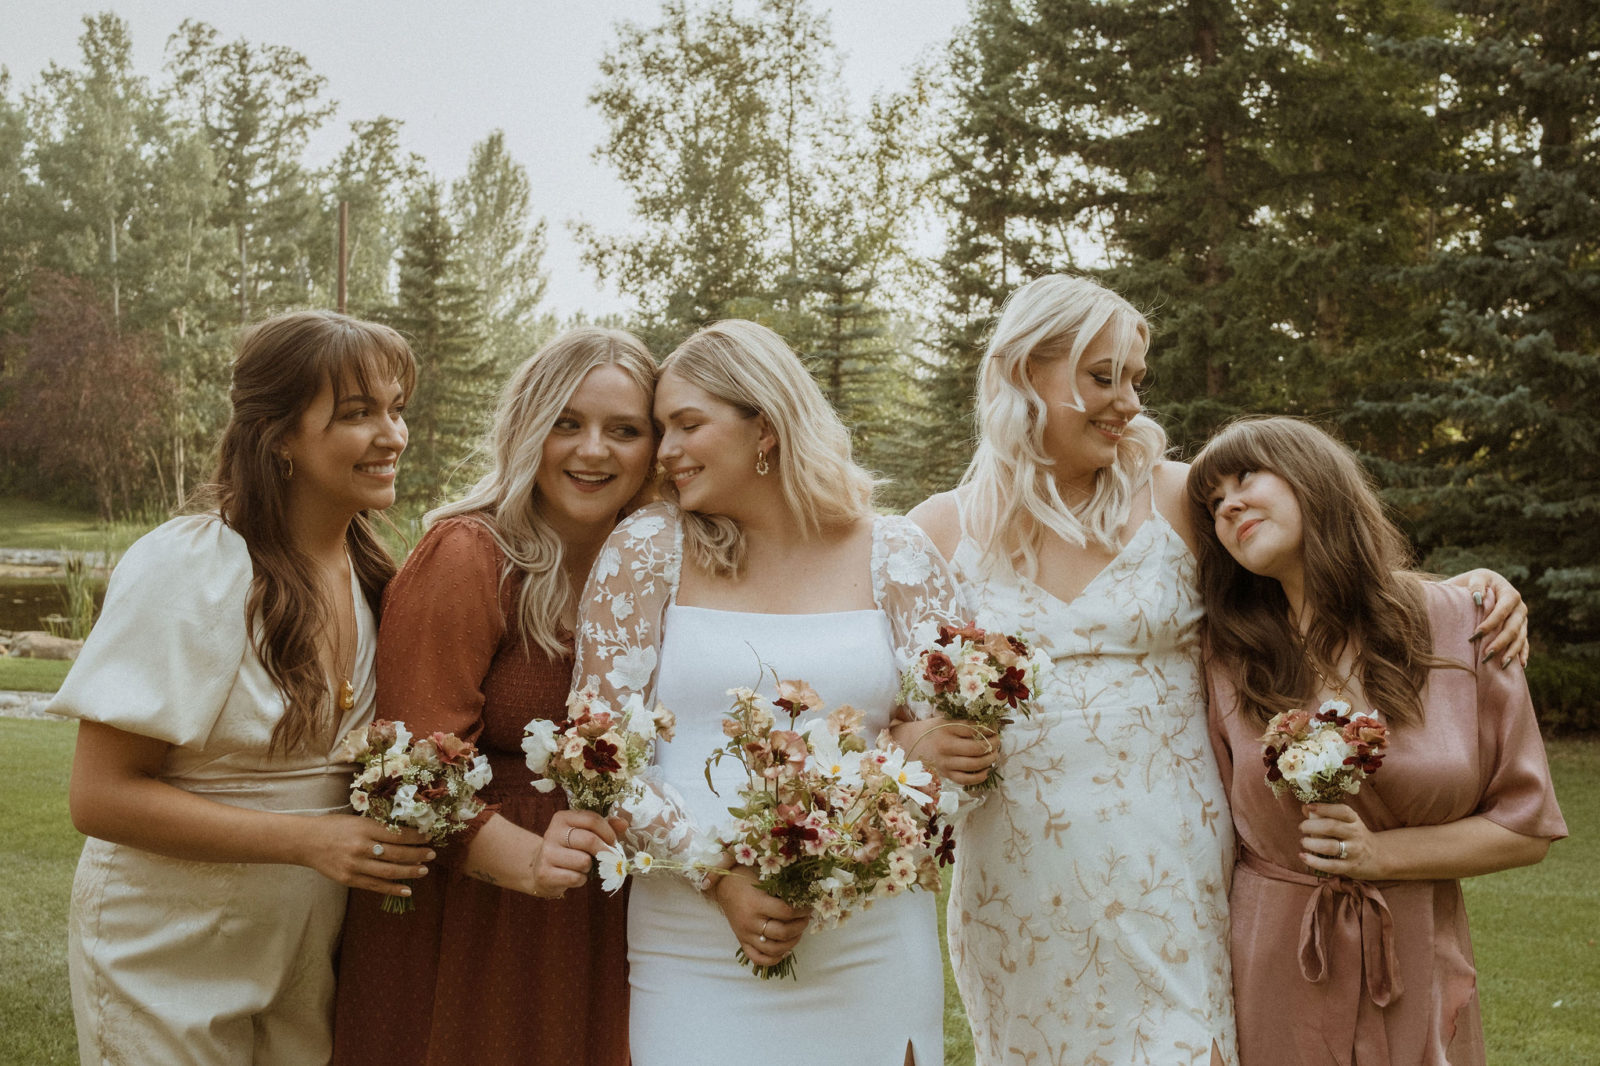 Unique bridal party outfits, bridal party attire inspiration, cottage core wedding wear in peach and dusty pink